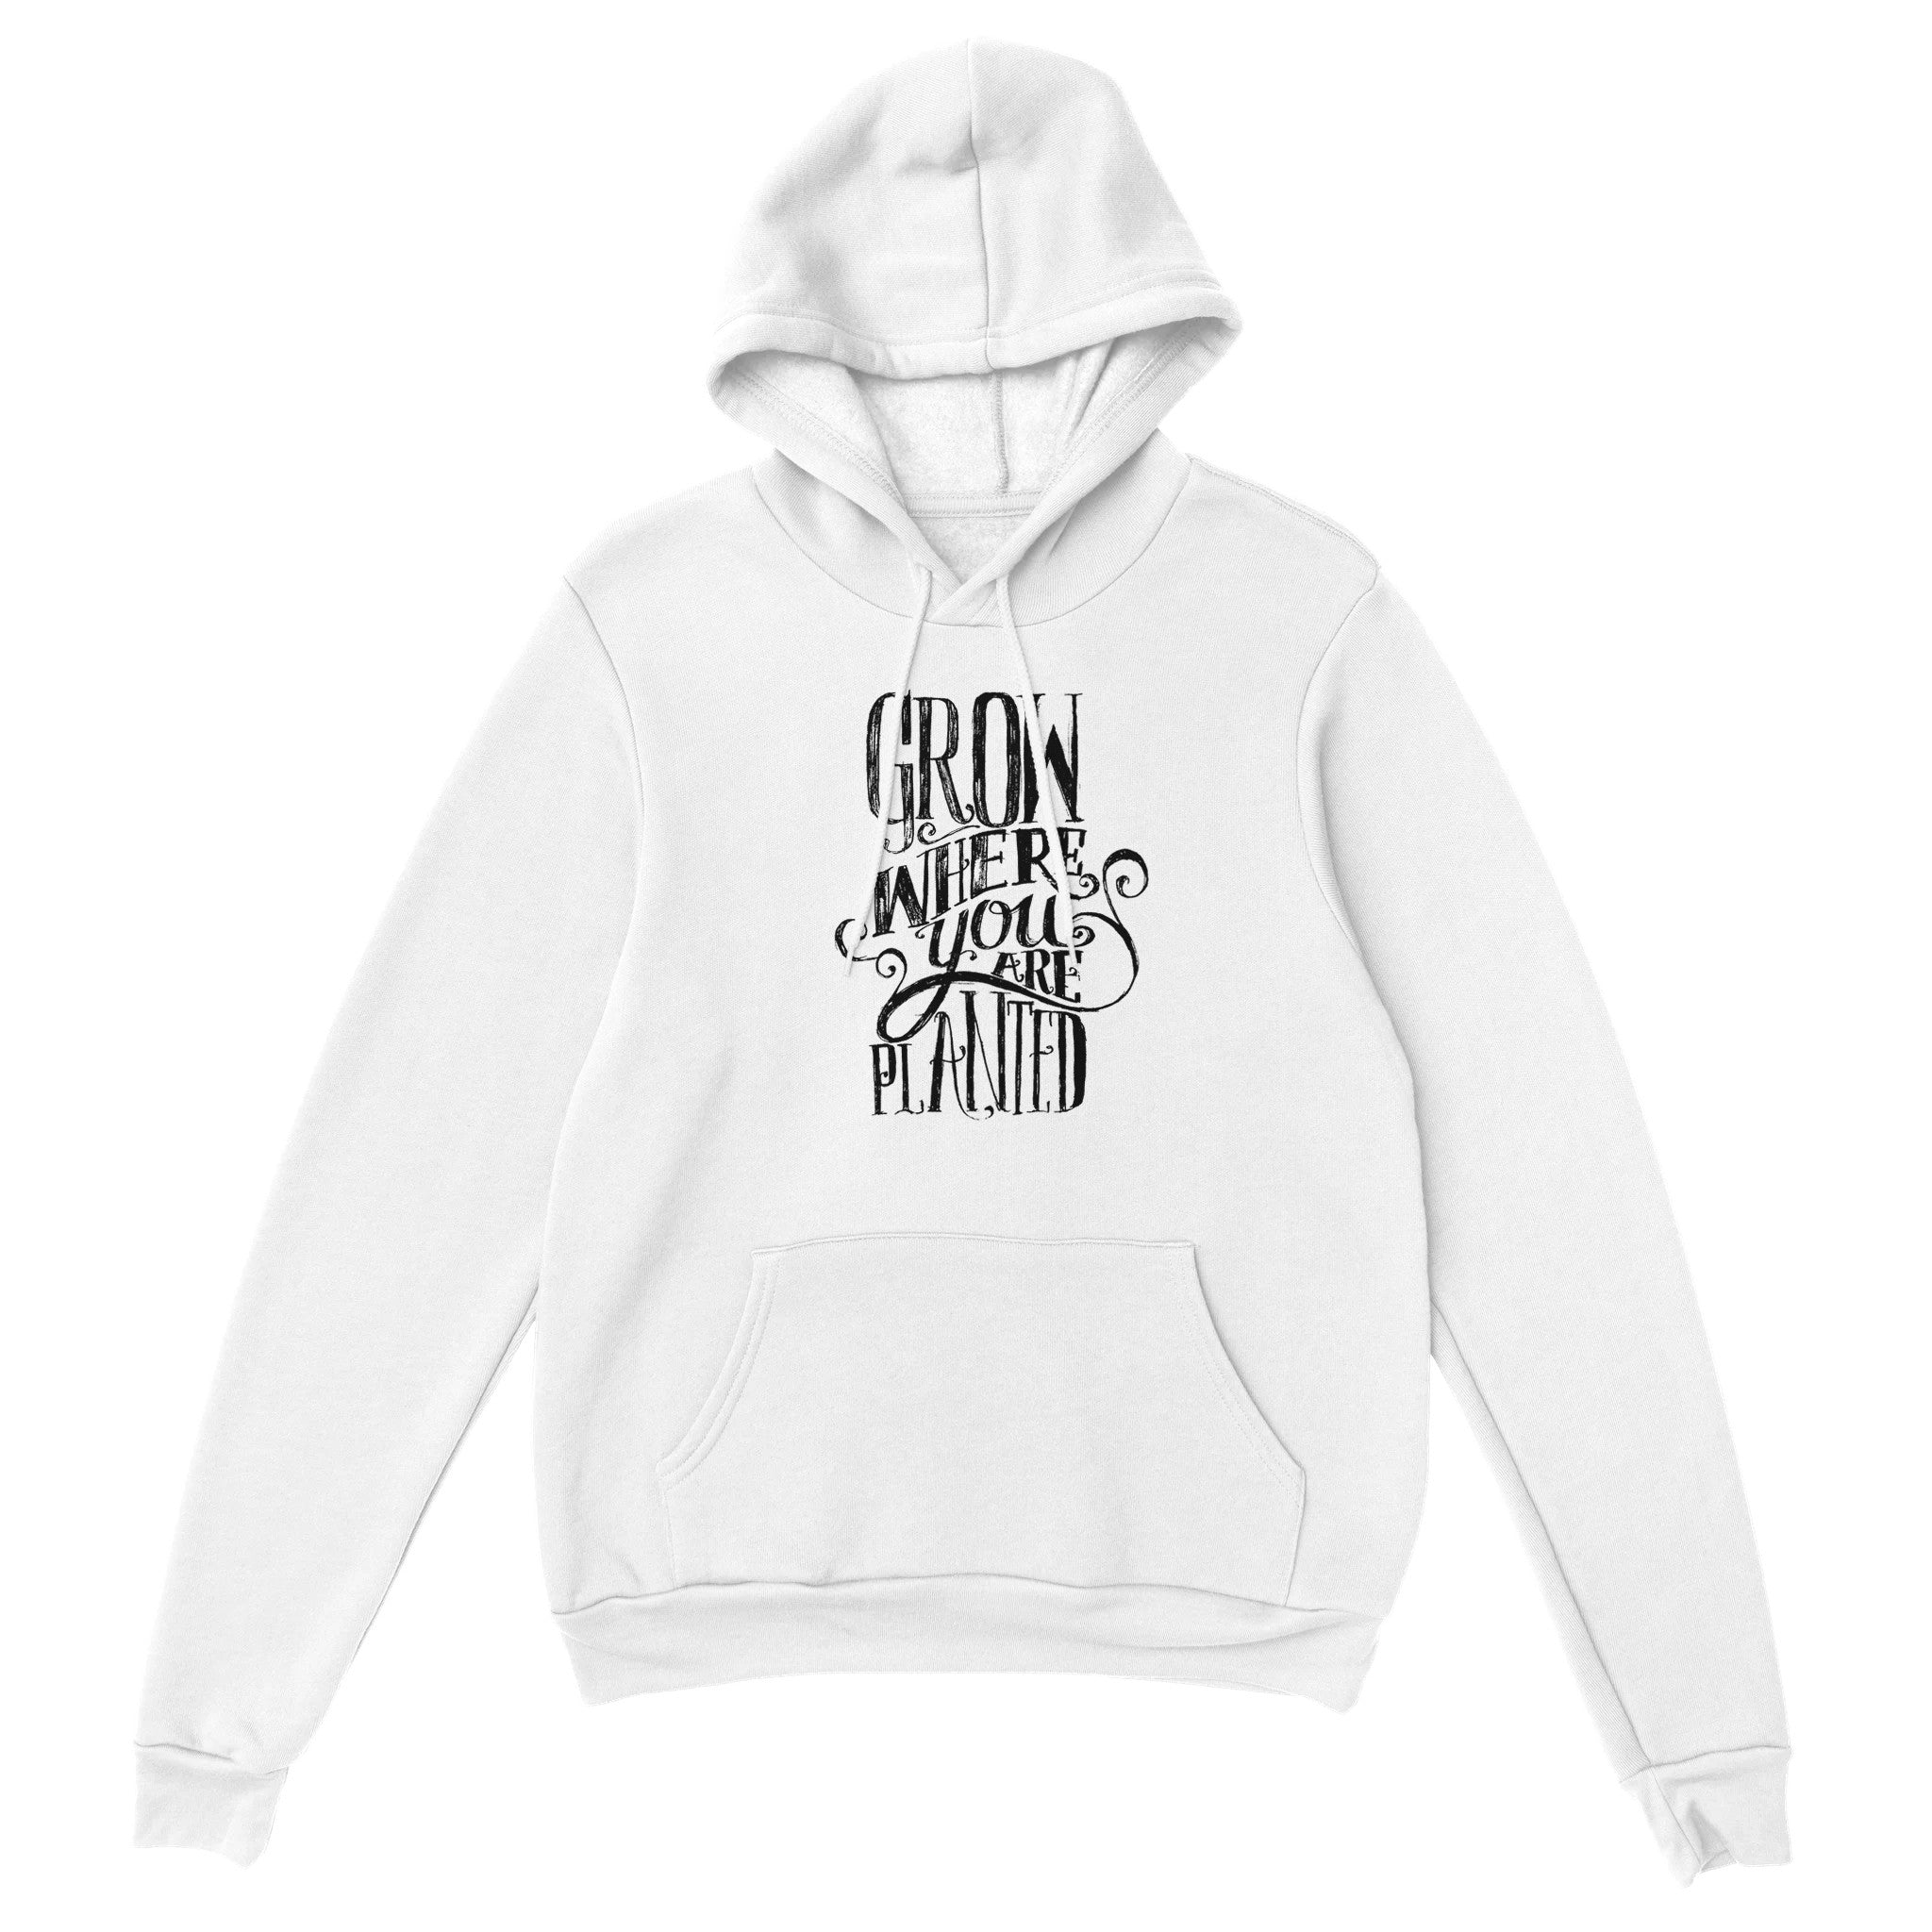 Grow Where You Are Planted Pullover Hoodie - Optimalprint